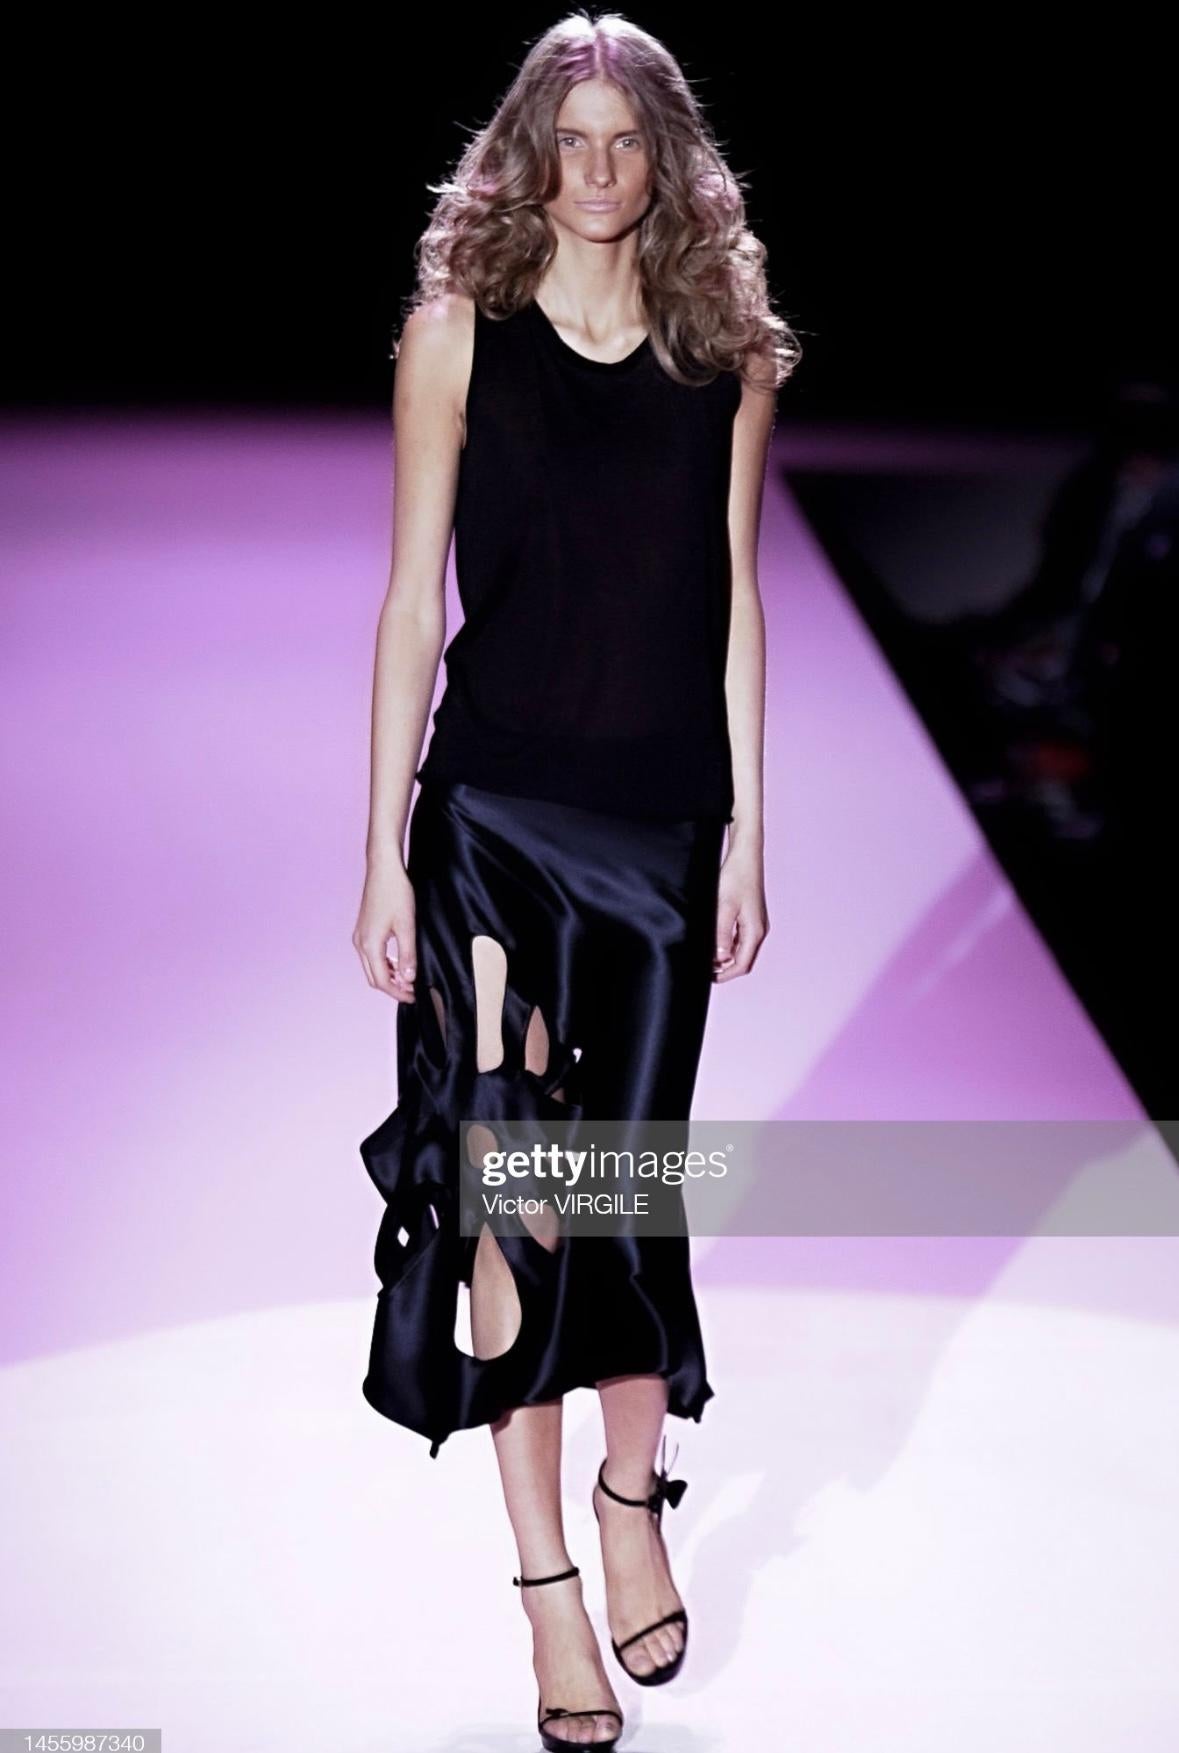 Presenting a fabulous tan suede Gucci midi skirt, designed by Tom Ford. From the Spring/Summer 2002 collection, the black satin version of this skirt debuted on the season's runway as part of look 31. Constructed entirely of suede, this flared skirt